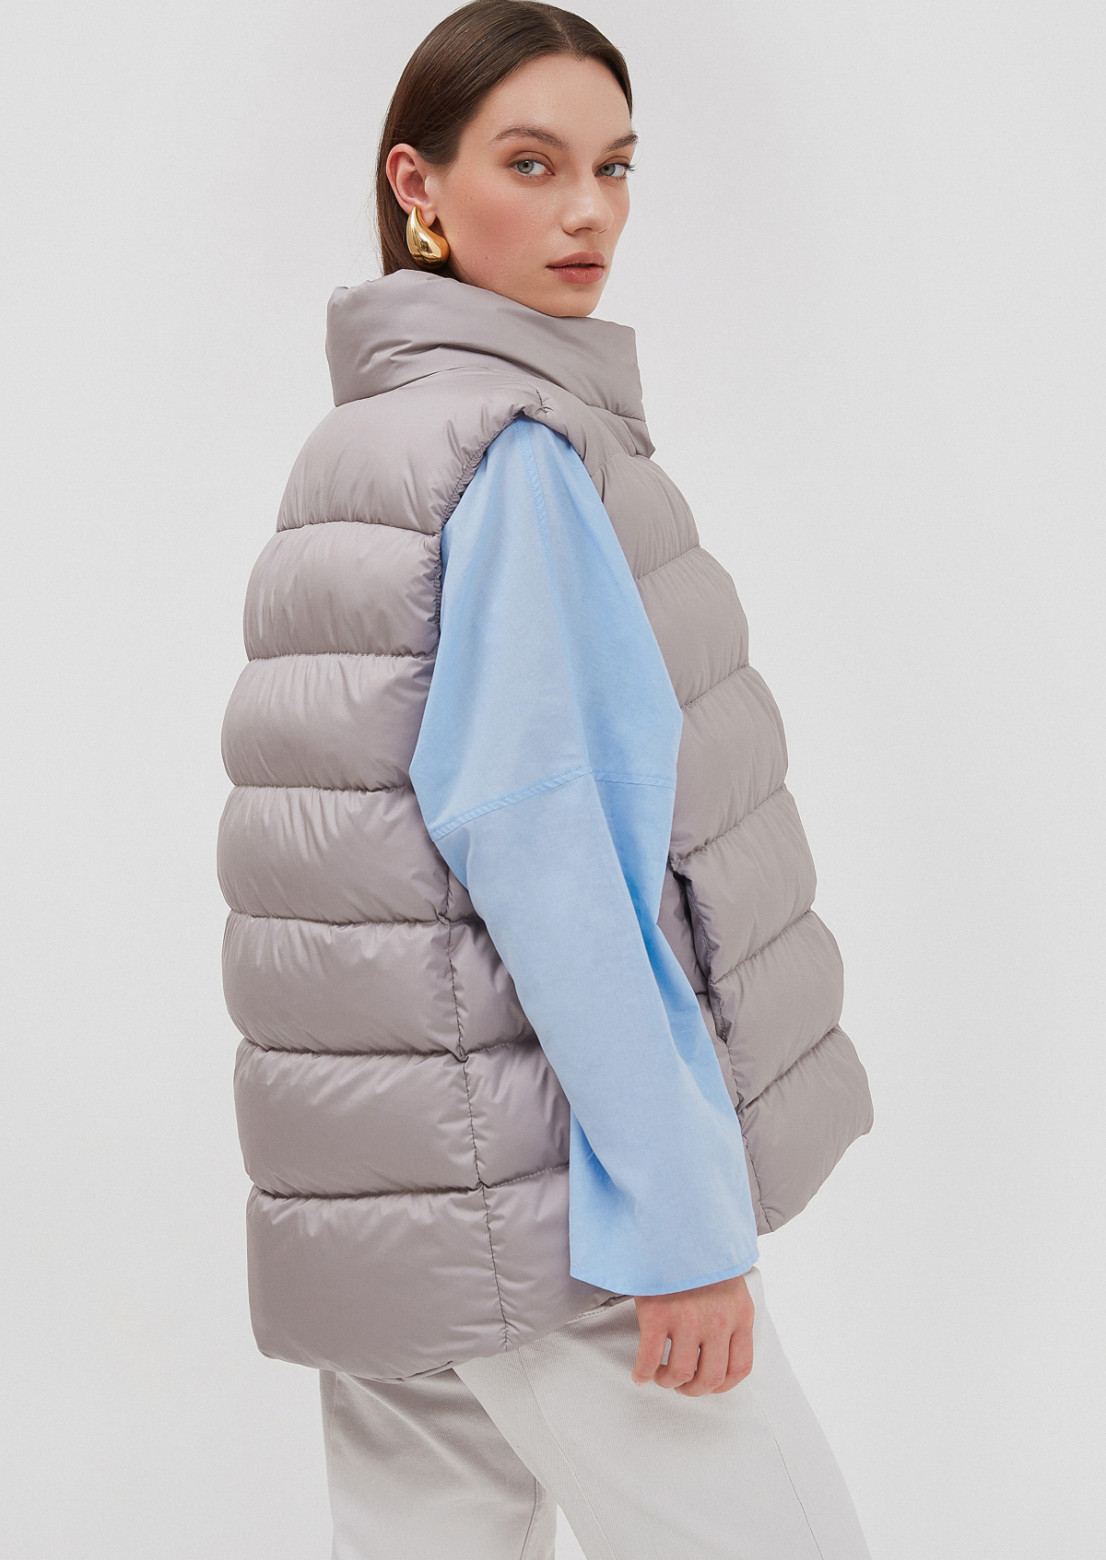 Grey color puffy vest with buttons